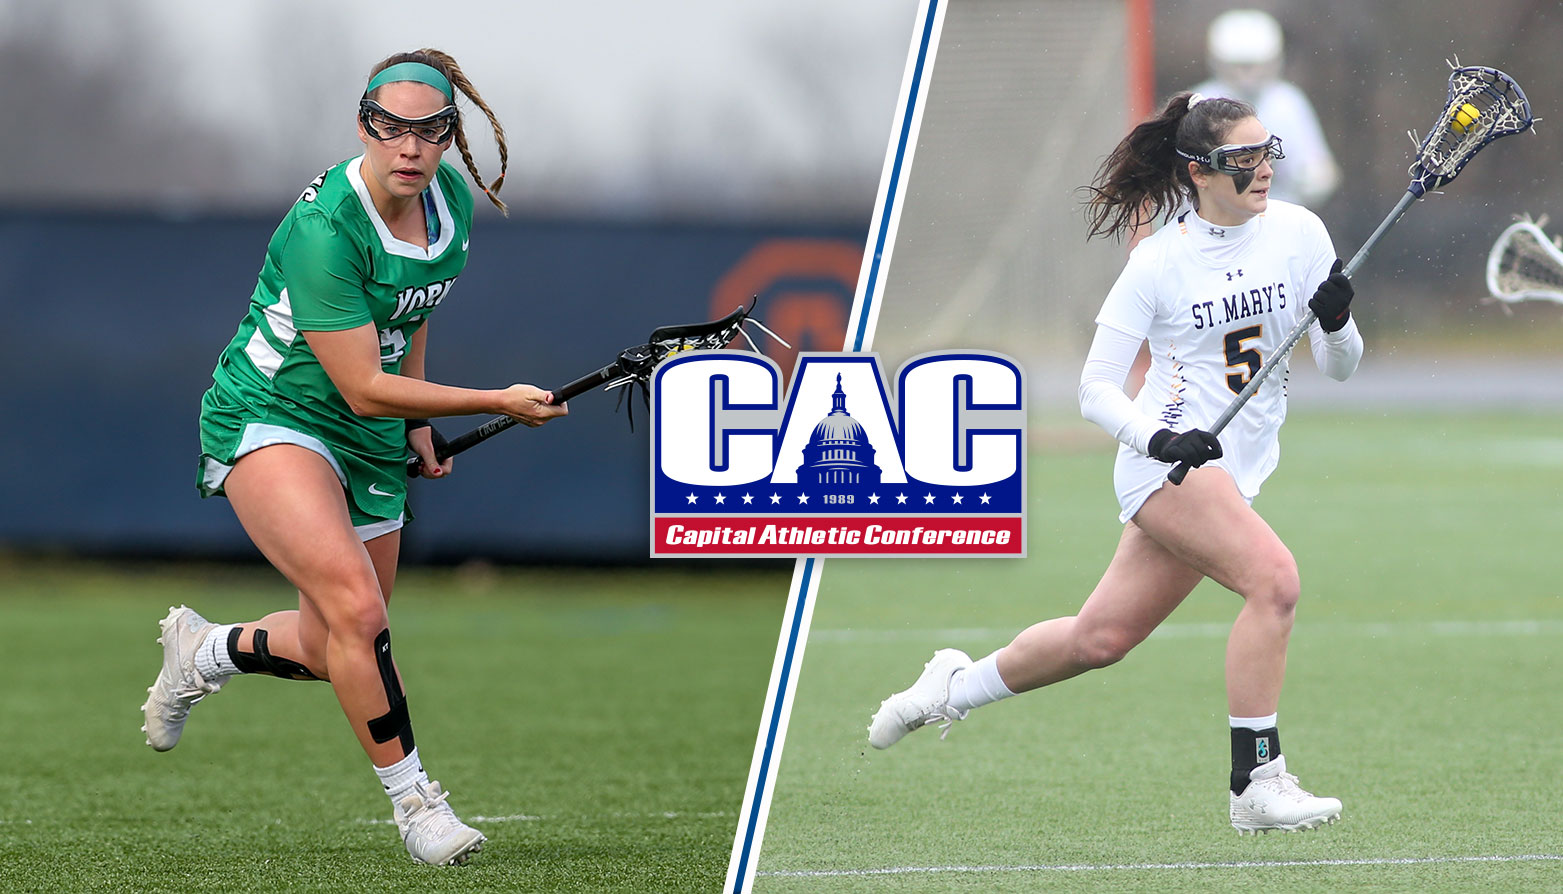 York's Clauter Named CAC Player of the Year; 2019 All-CAC Women's Lacrosse Teams Announced